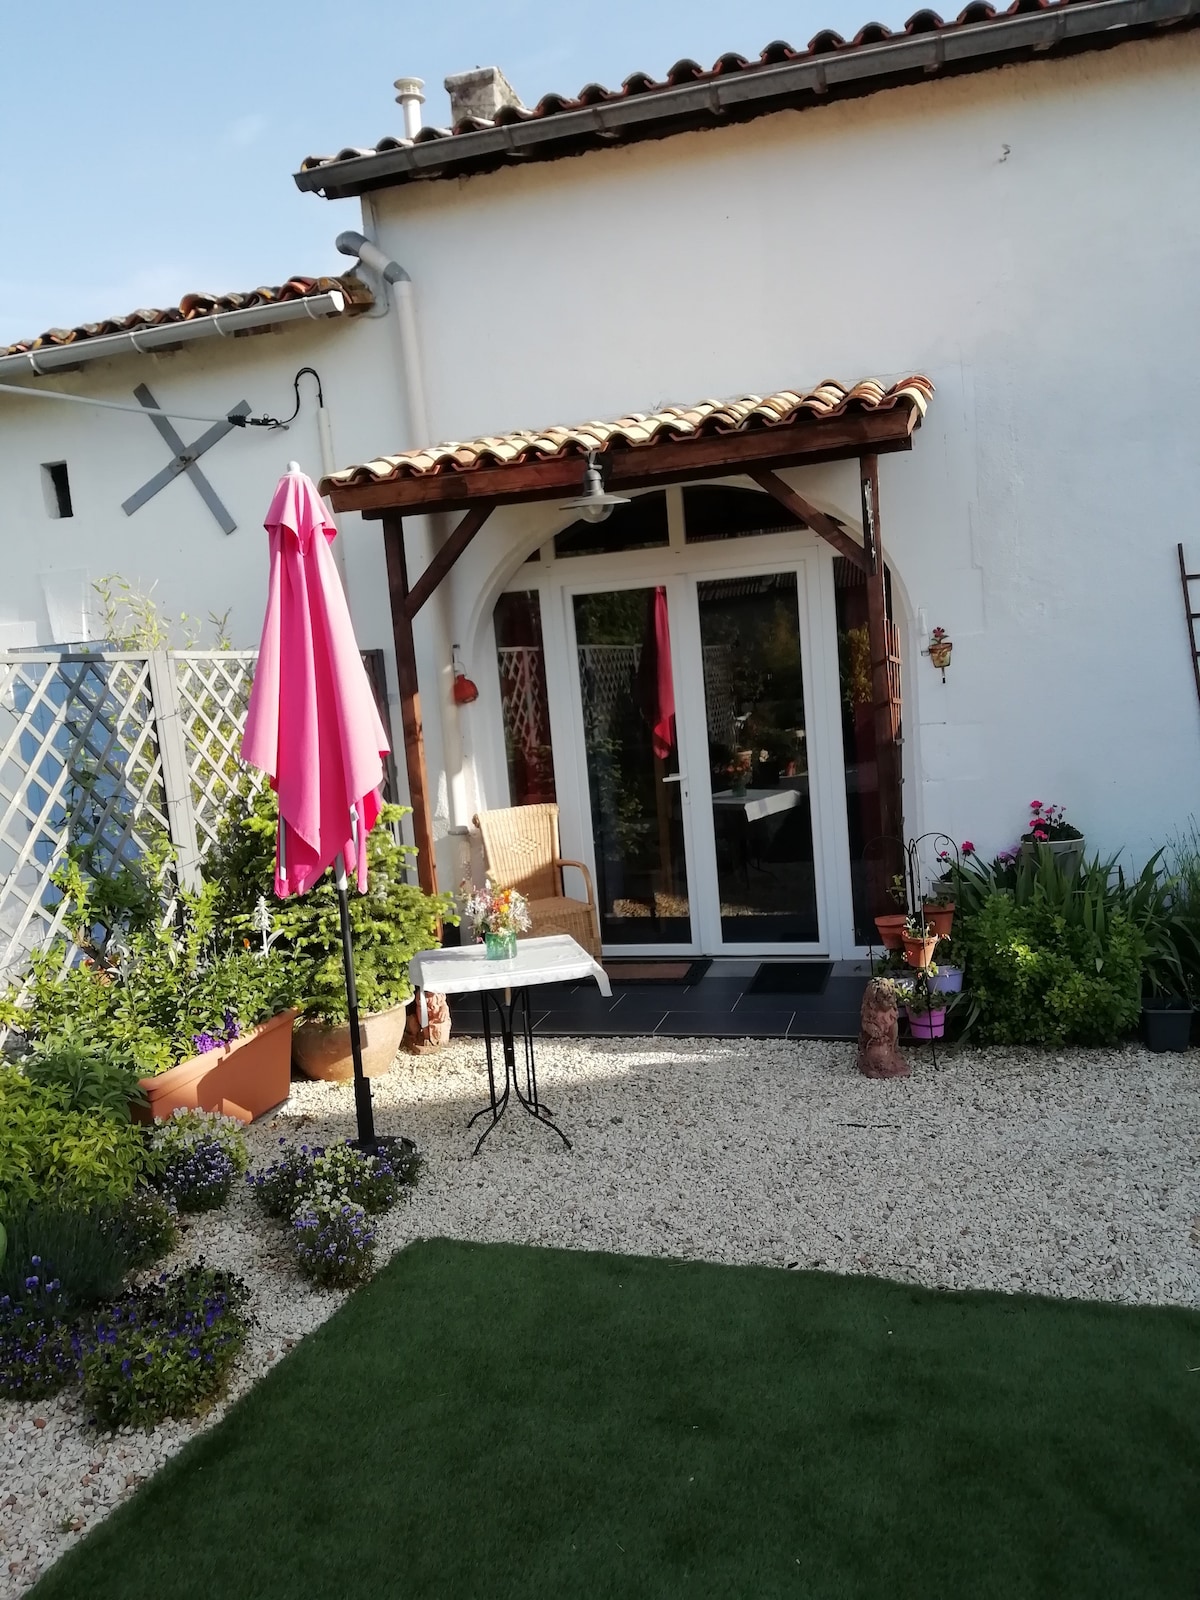 One bedroom self catering gite in Charente France.